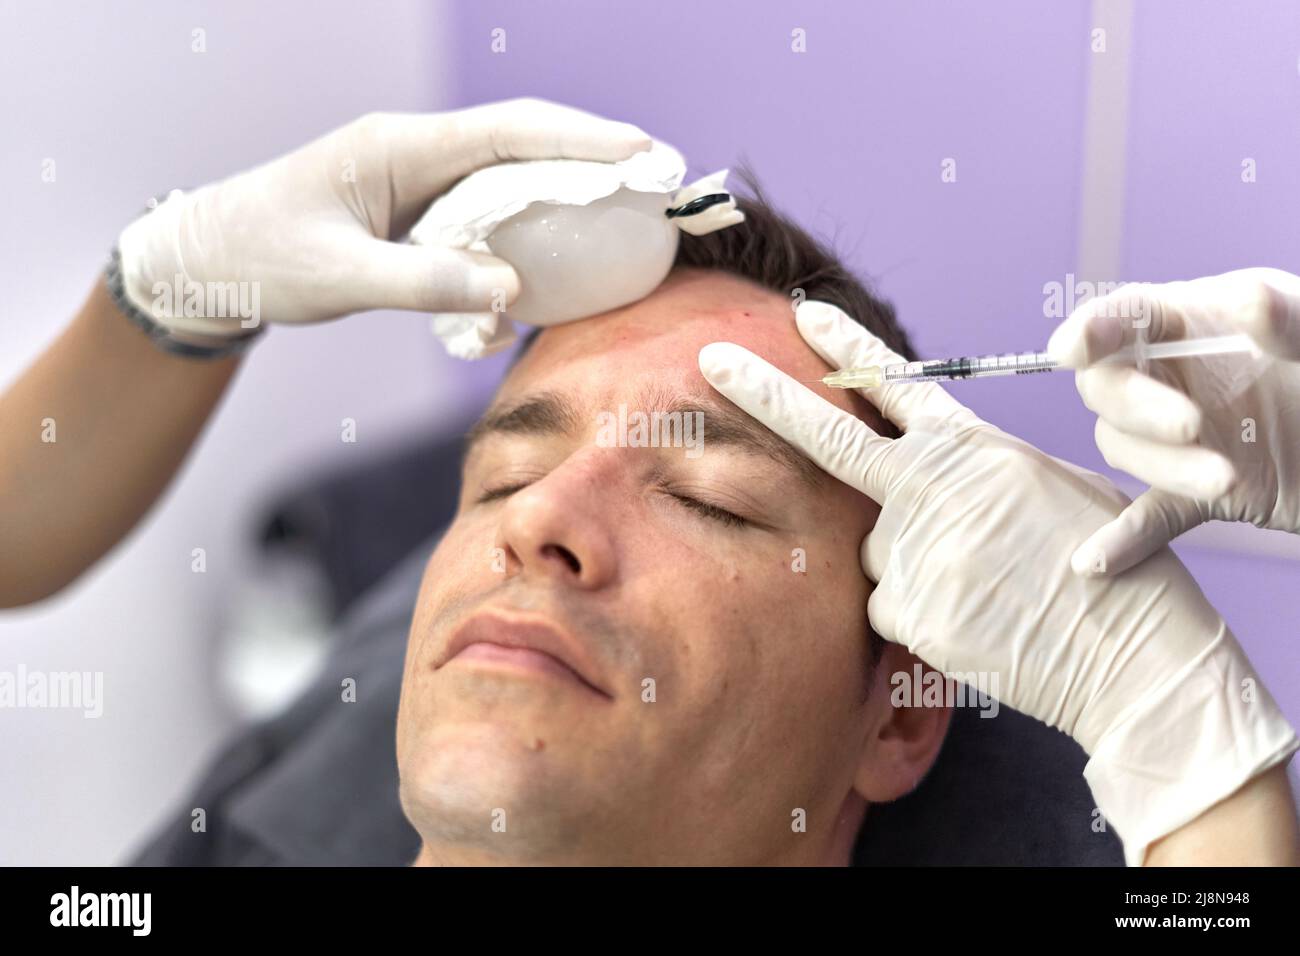 Nurse applying ice to the face of a patient while receiving a botox vaccine Stock Photo